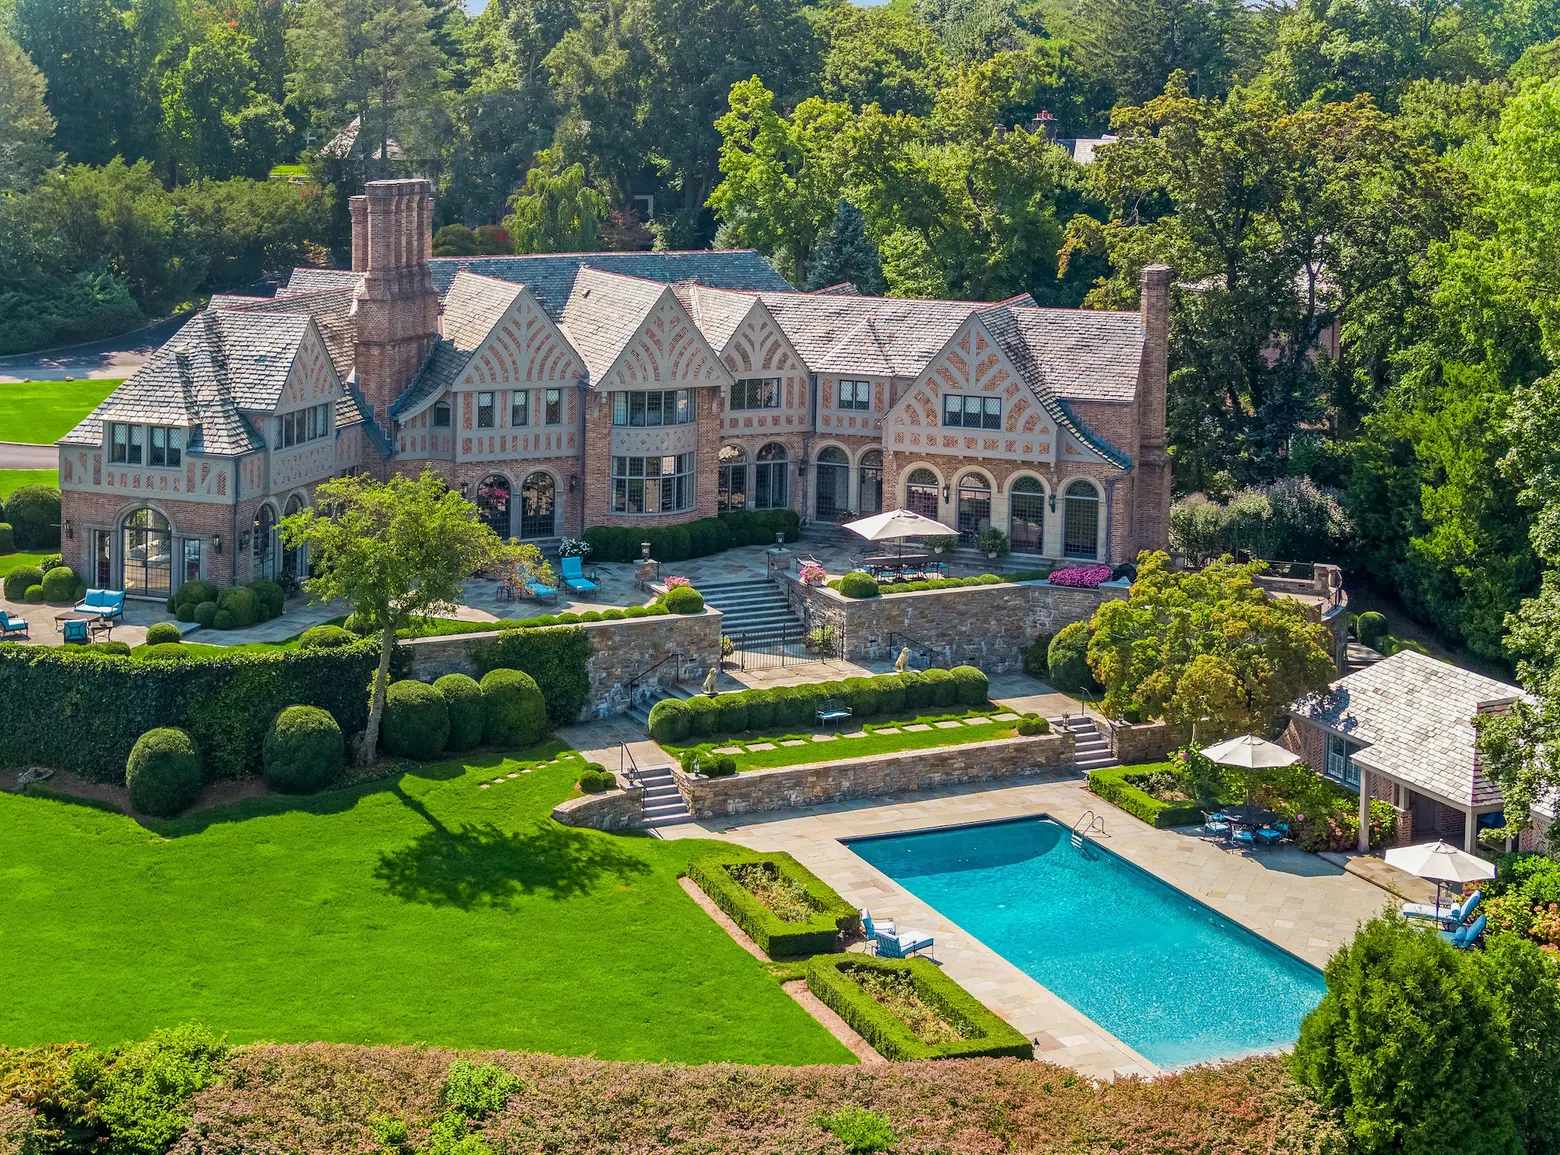 Lavish Tudor estate on the grounds of the Westchester Country Club seeks $8M